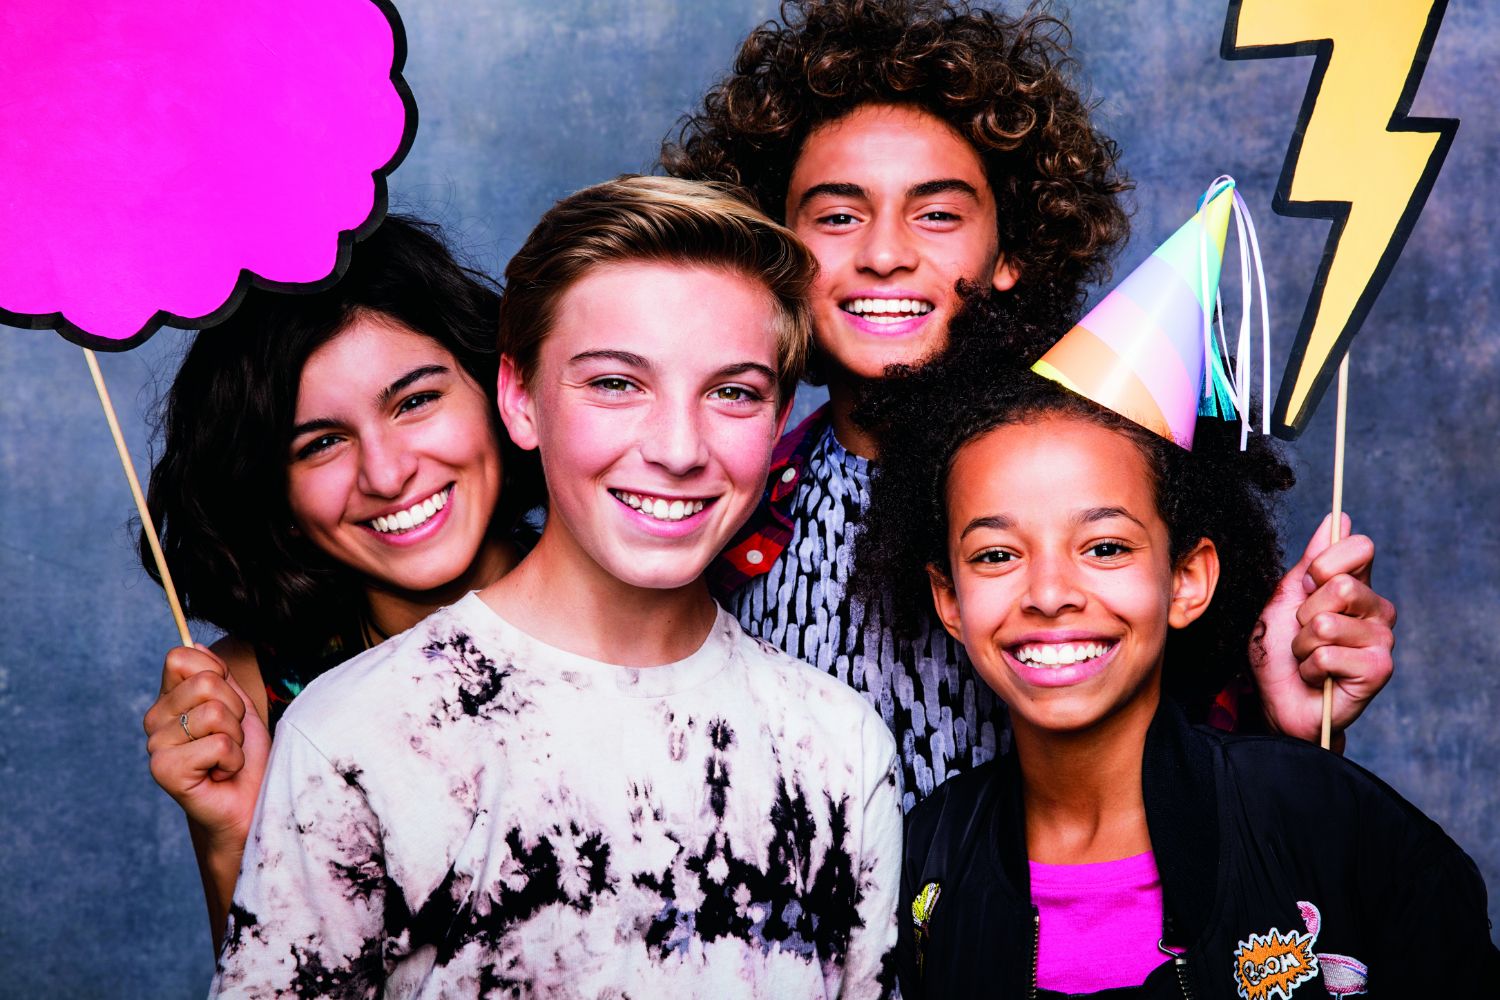 Teens with Invisalign at a photo booth